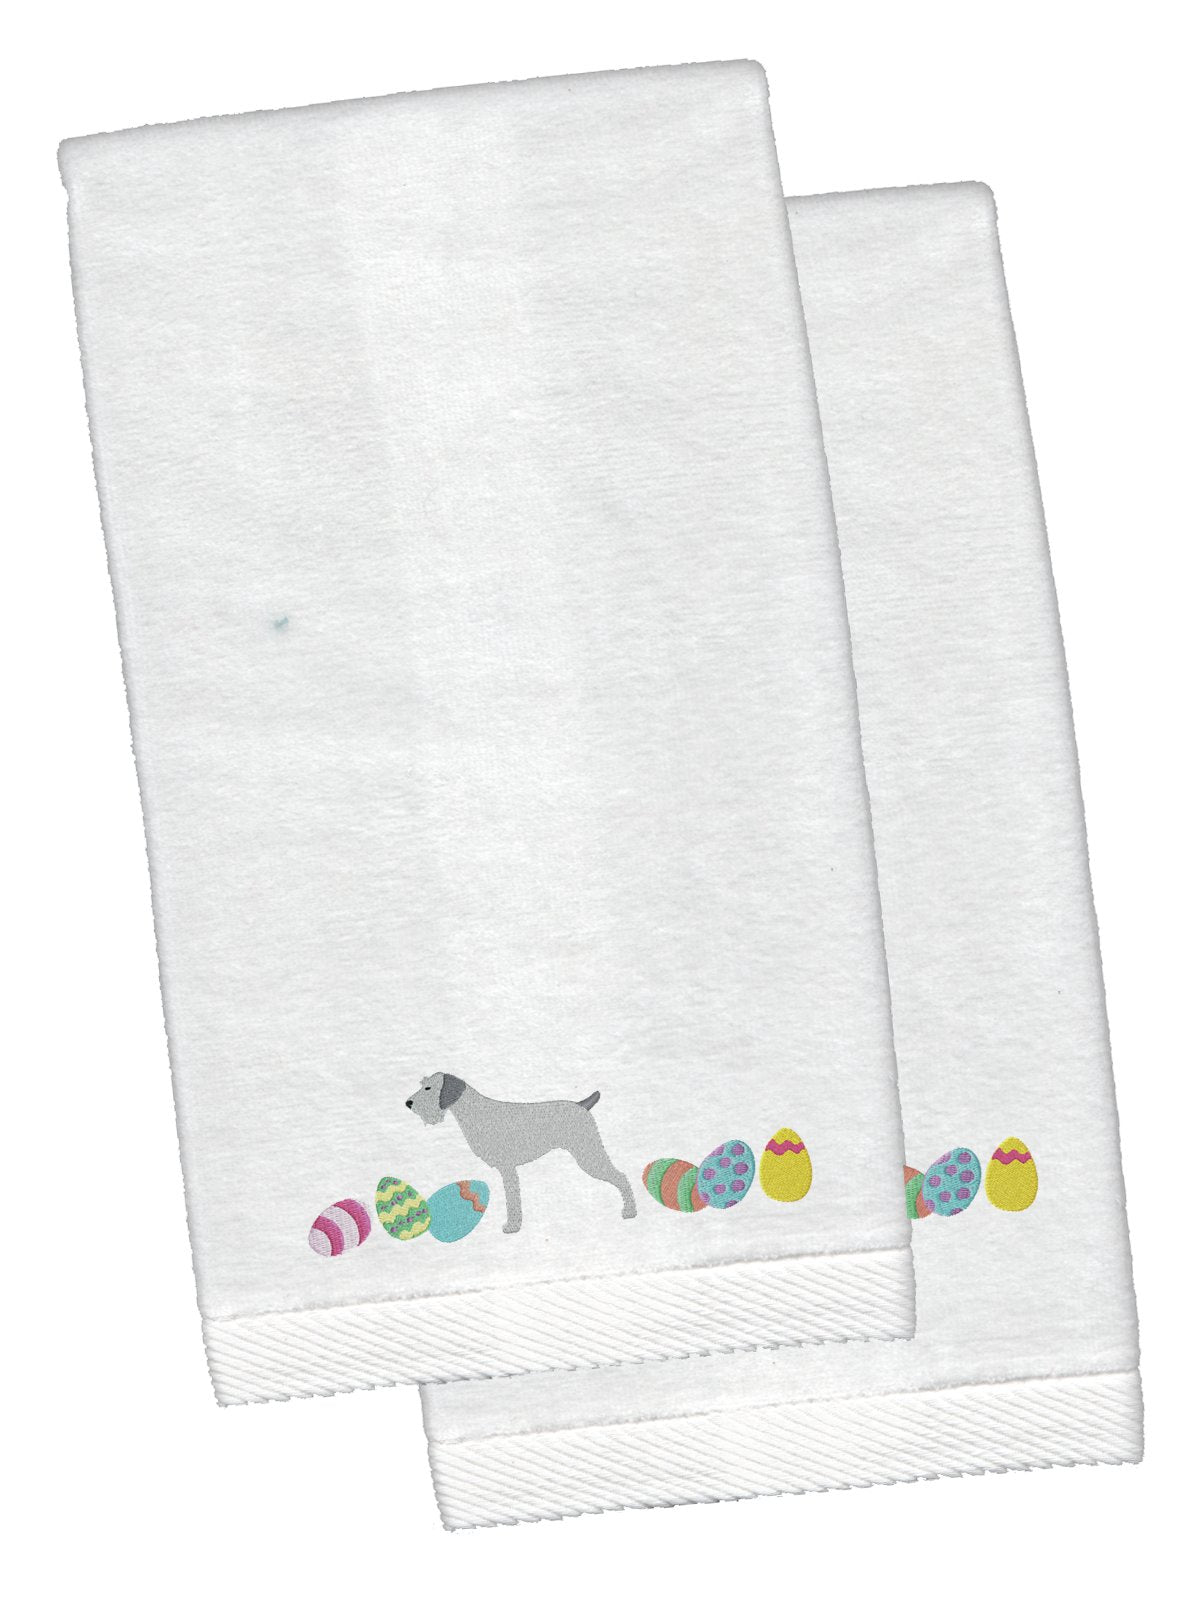 German Wirehaired Pointer Easter White Embroidered Plush Hand Towel Set of 2 CK1645KTEMB by Caroline's Treasures